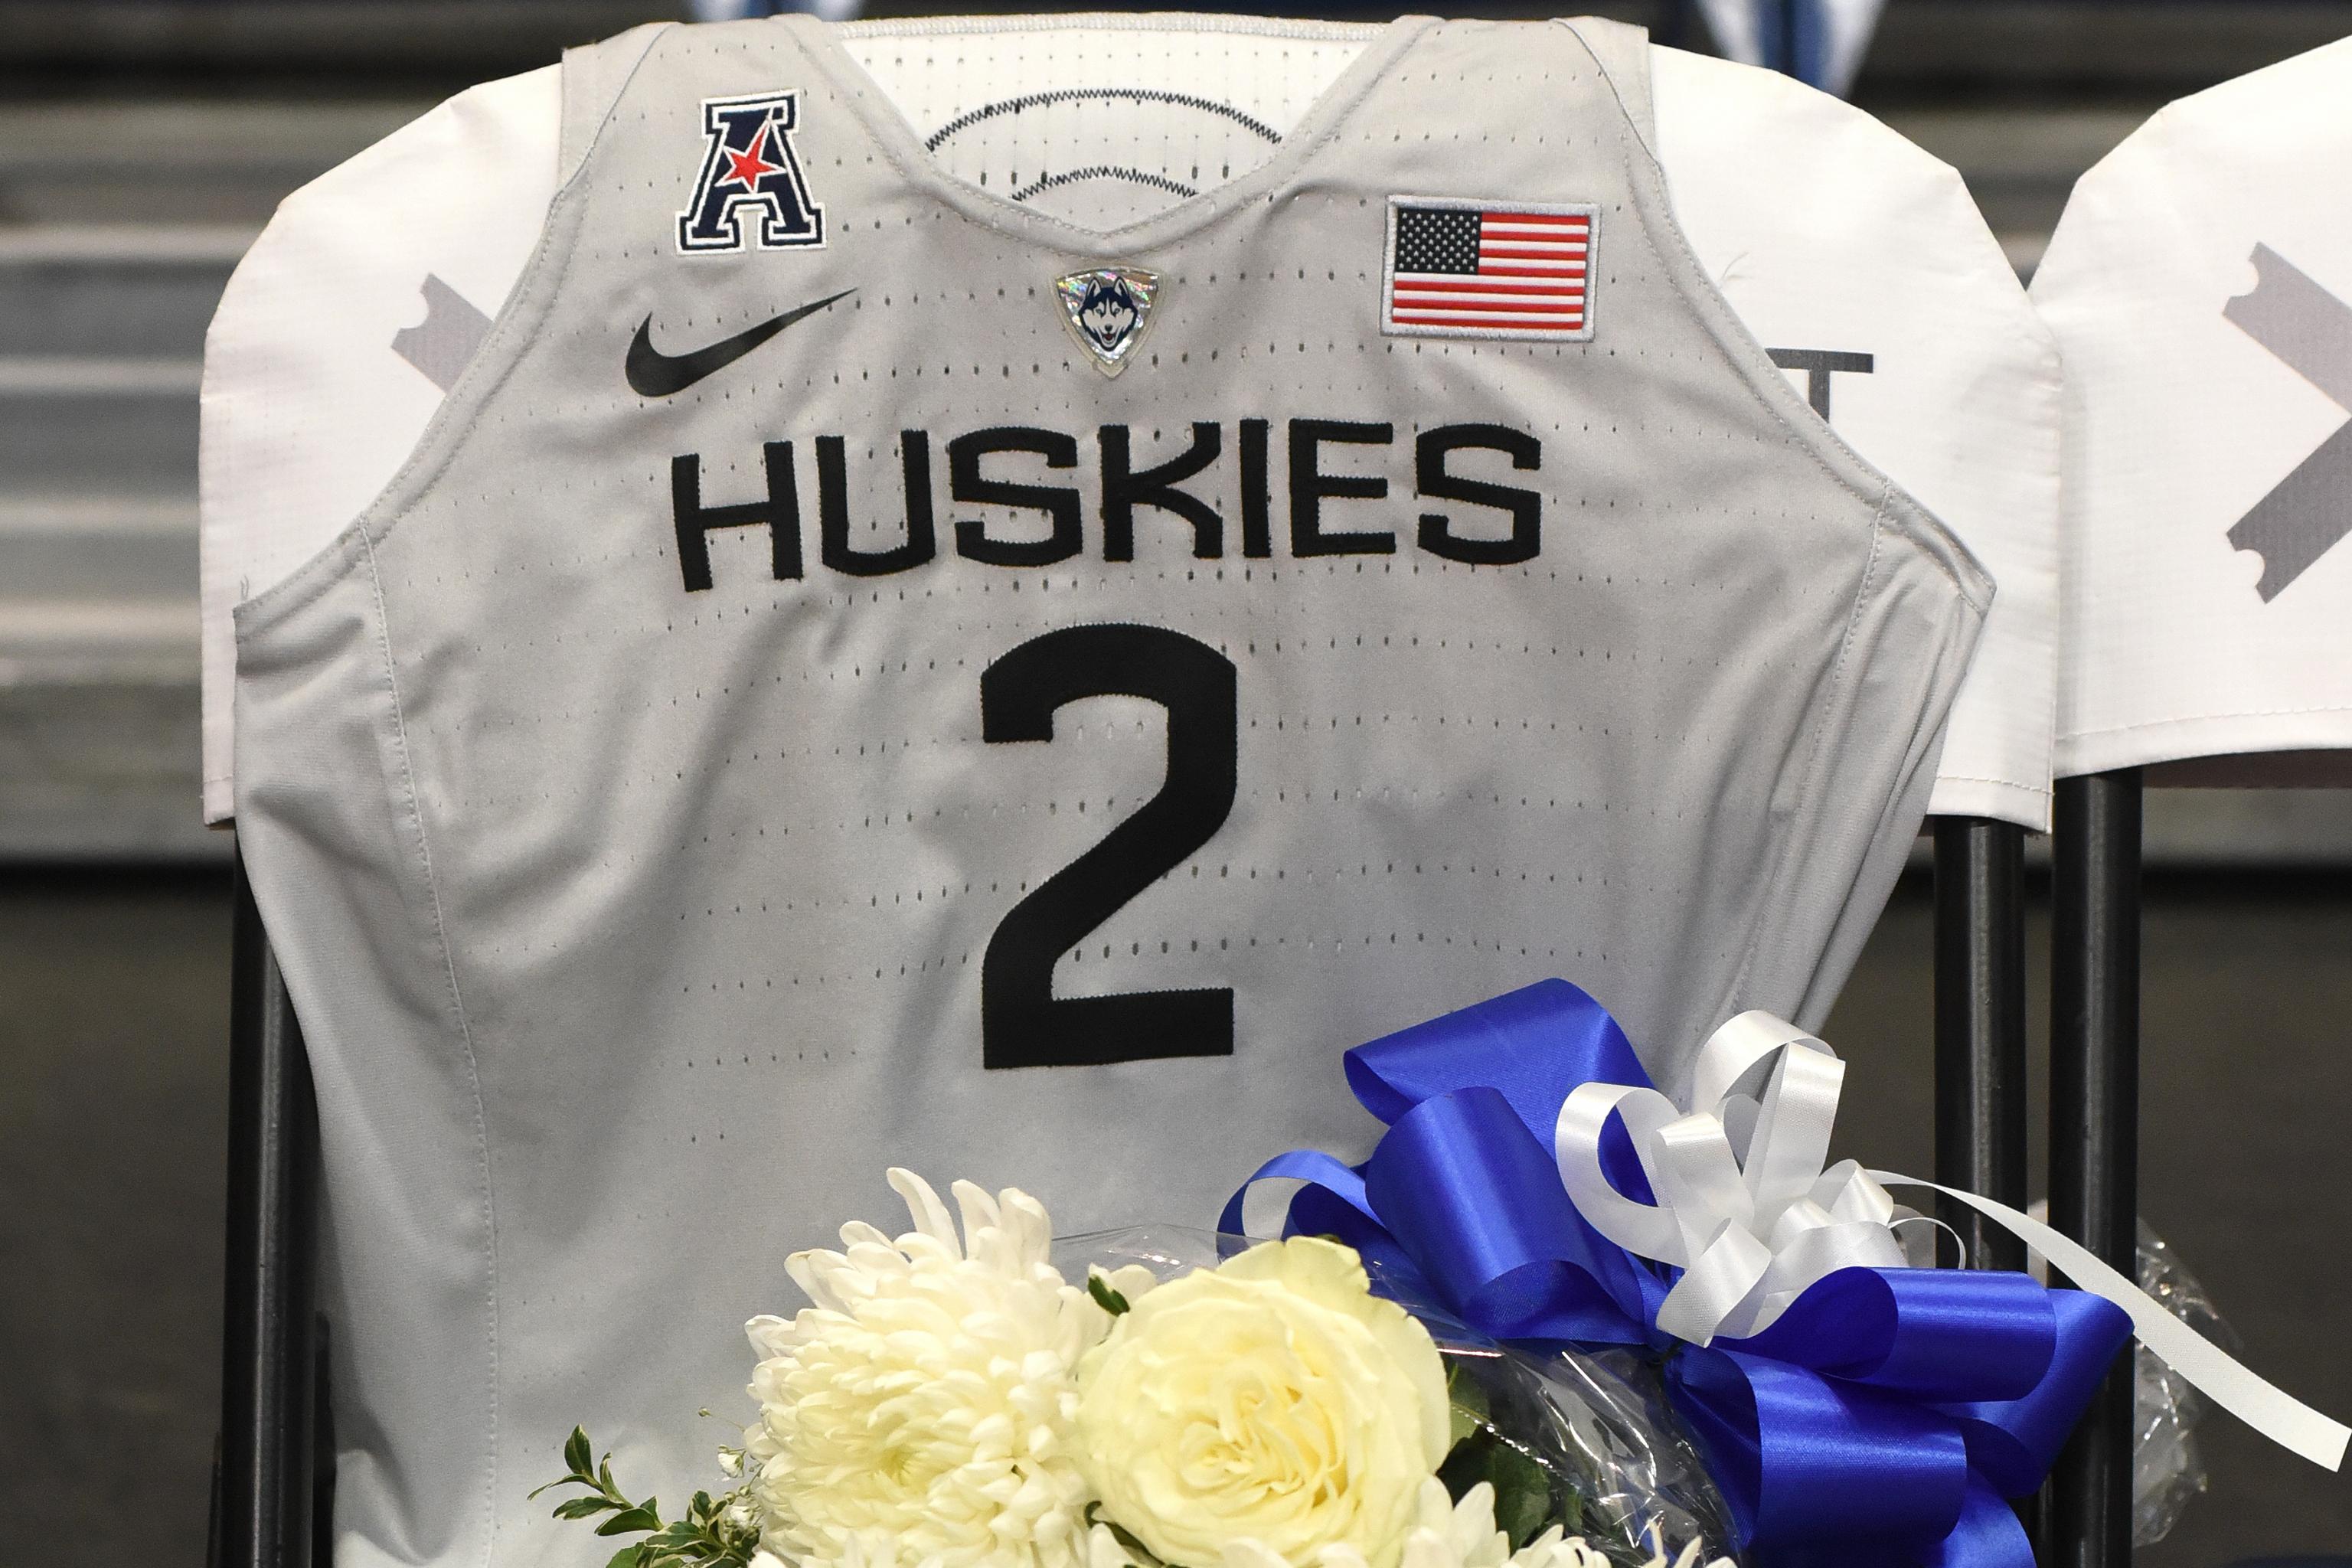 Gianna Bryant honored by UConn women's basketball team in touching tribute  - CBS News